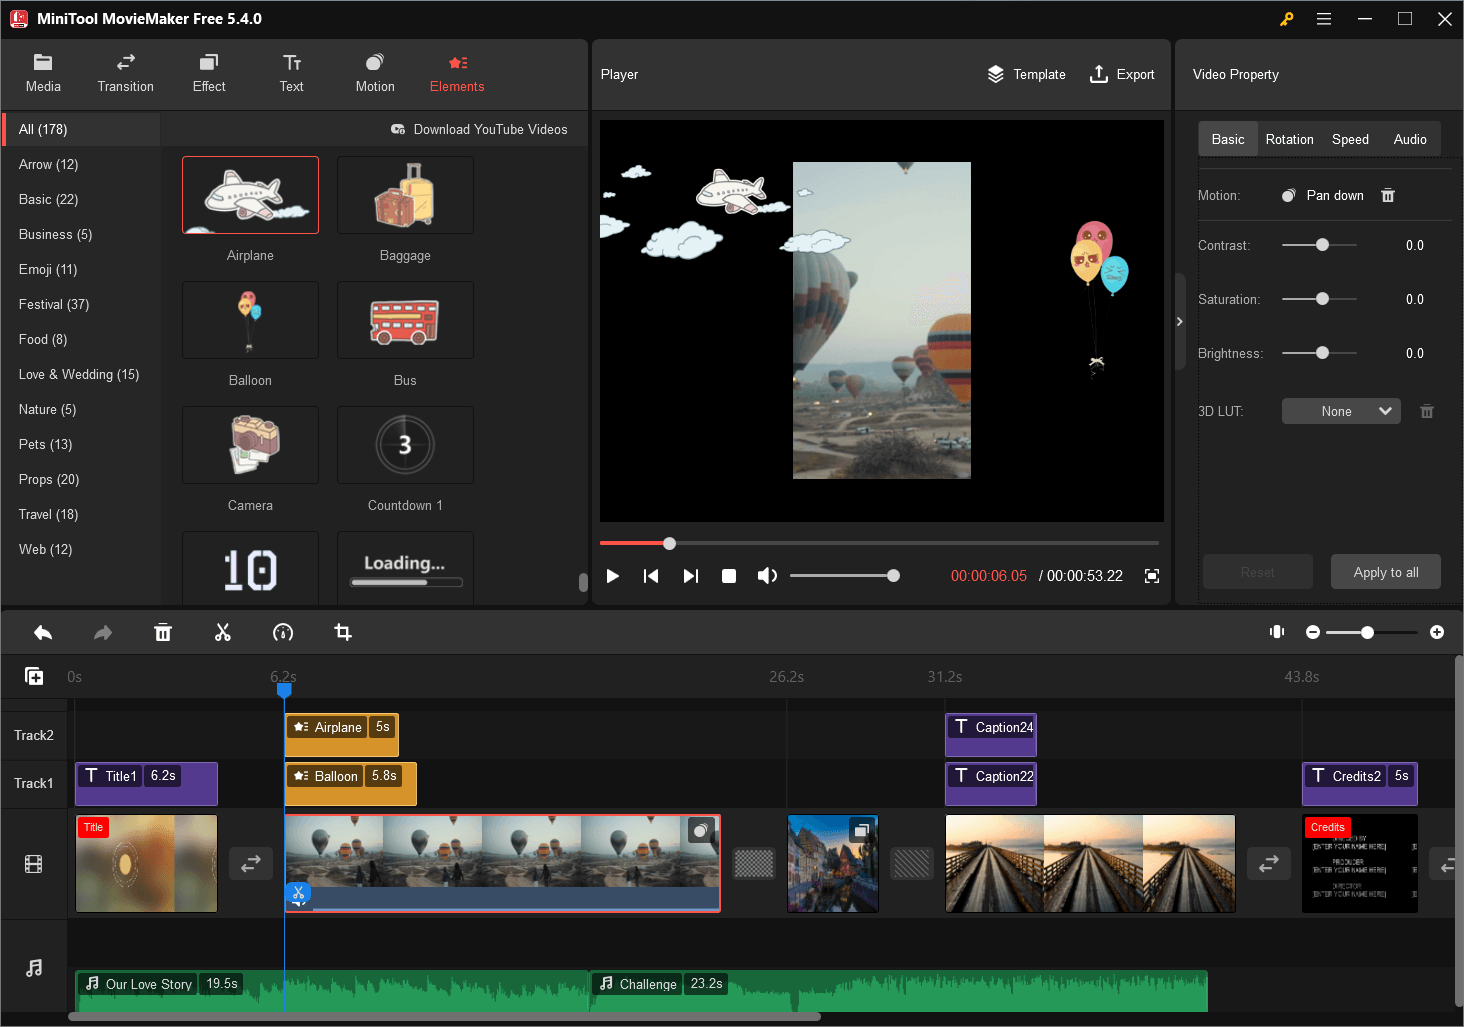 create a video manually with MiniTool MovieMaker